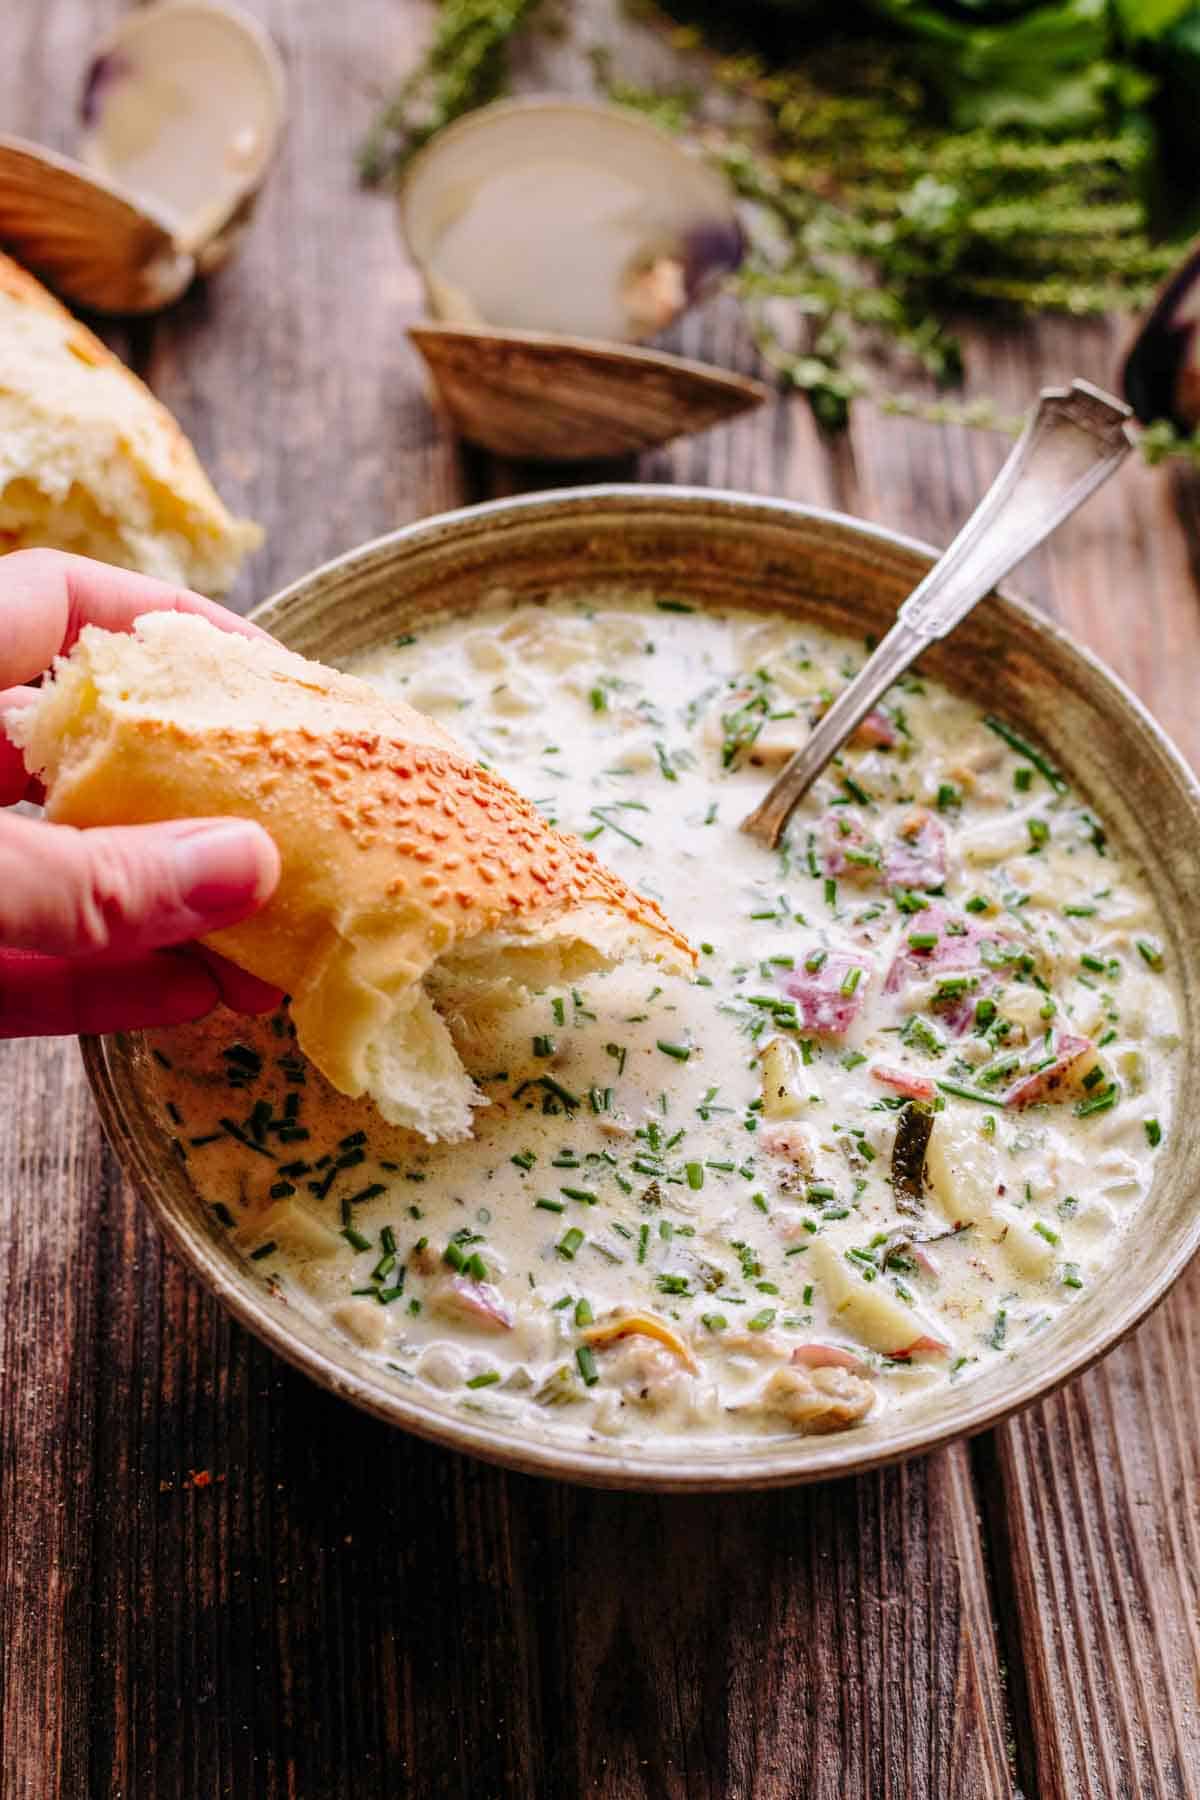 https://coleycooks.com/wp-content/uploads/2023/05/the-best-classic-creamy-new-england-clam-chowder-4.jpg